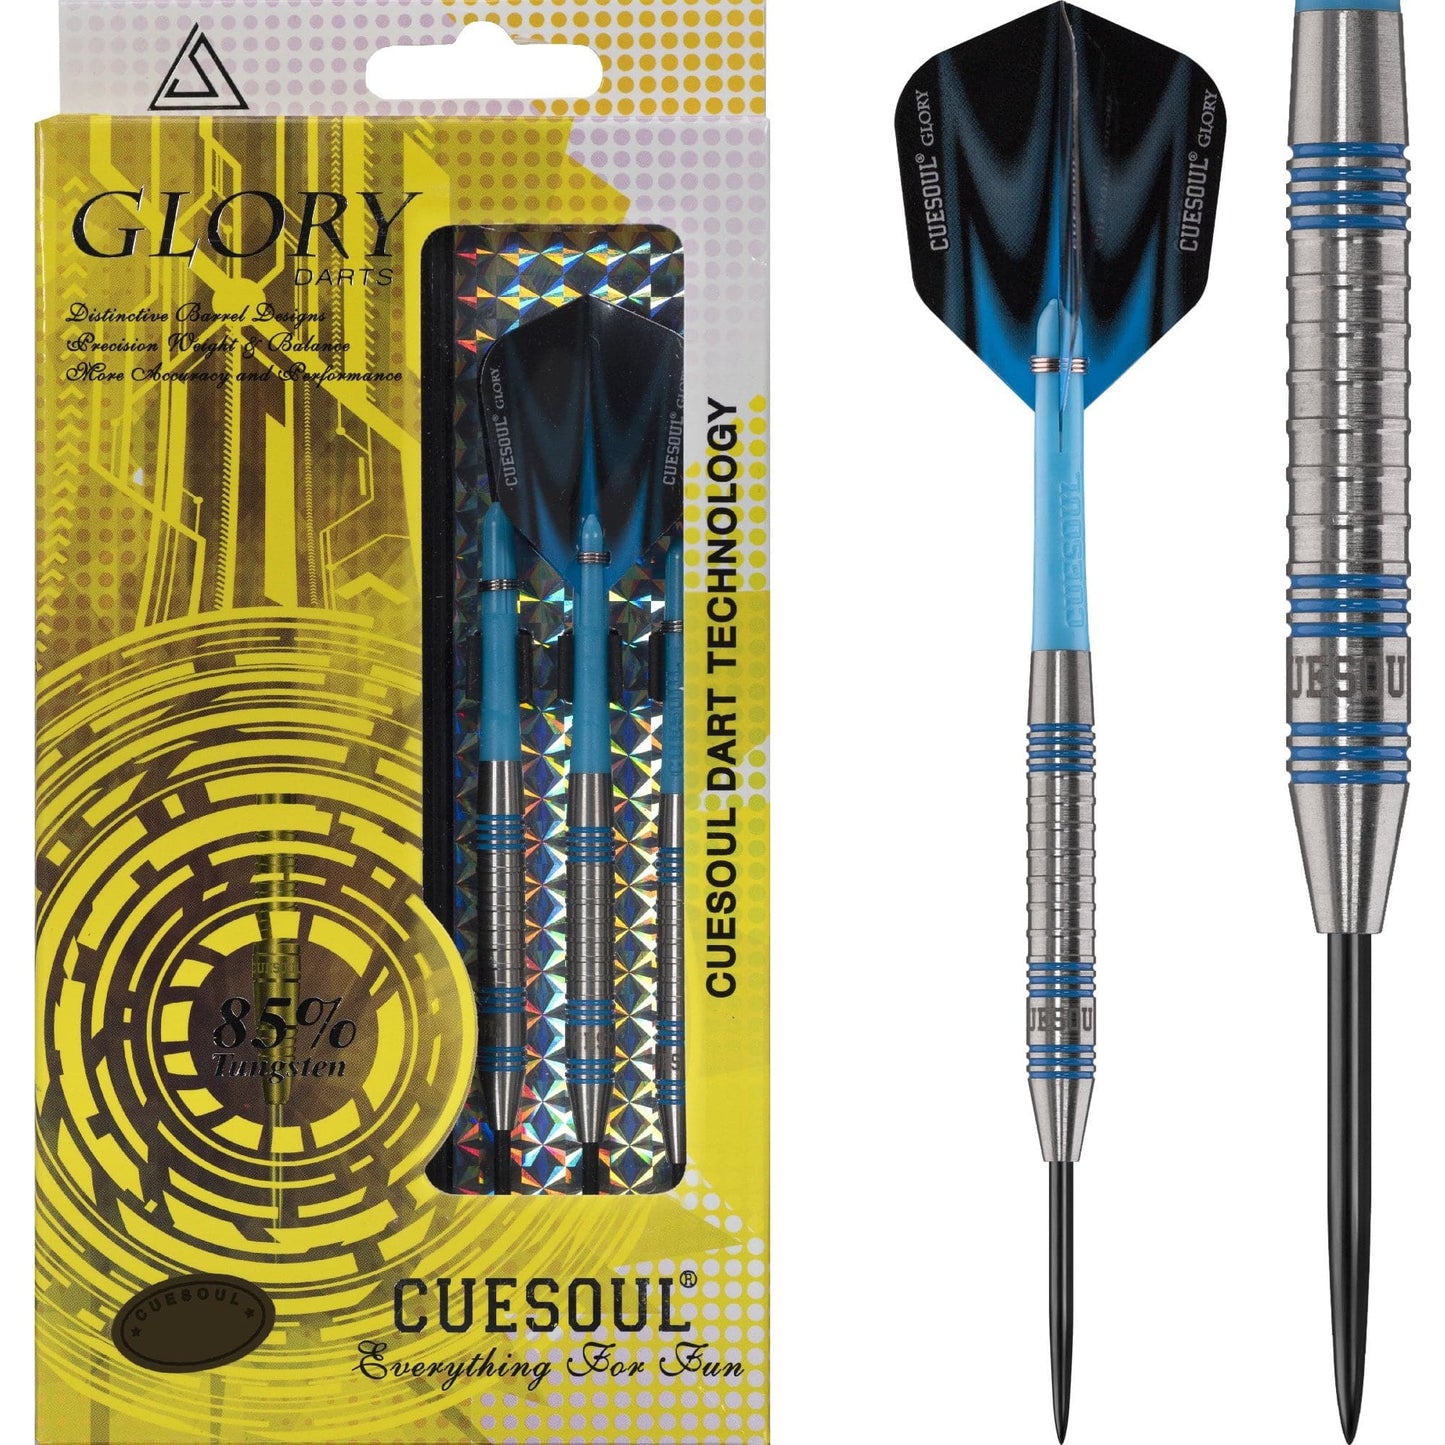 Cuesoul - Steel Tip Tungsten Darts - Glory - Blue Grooves - Ringed 22g